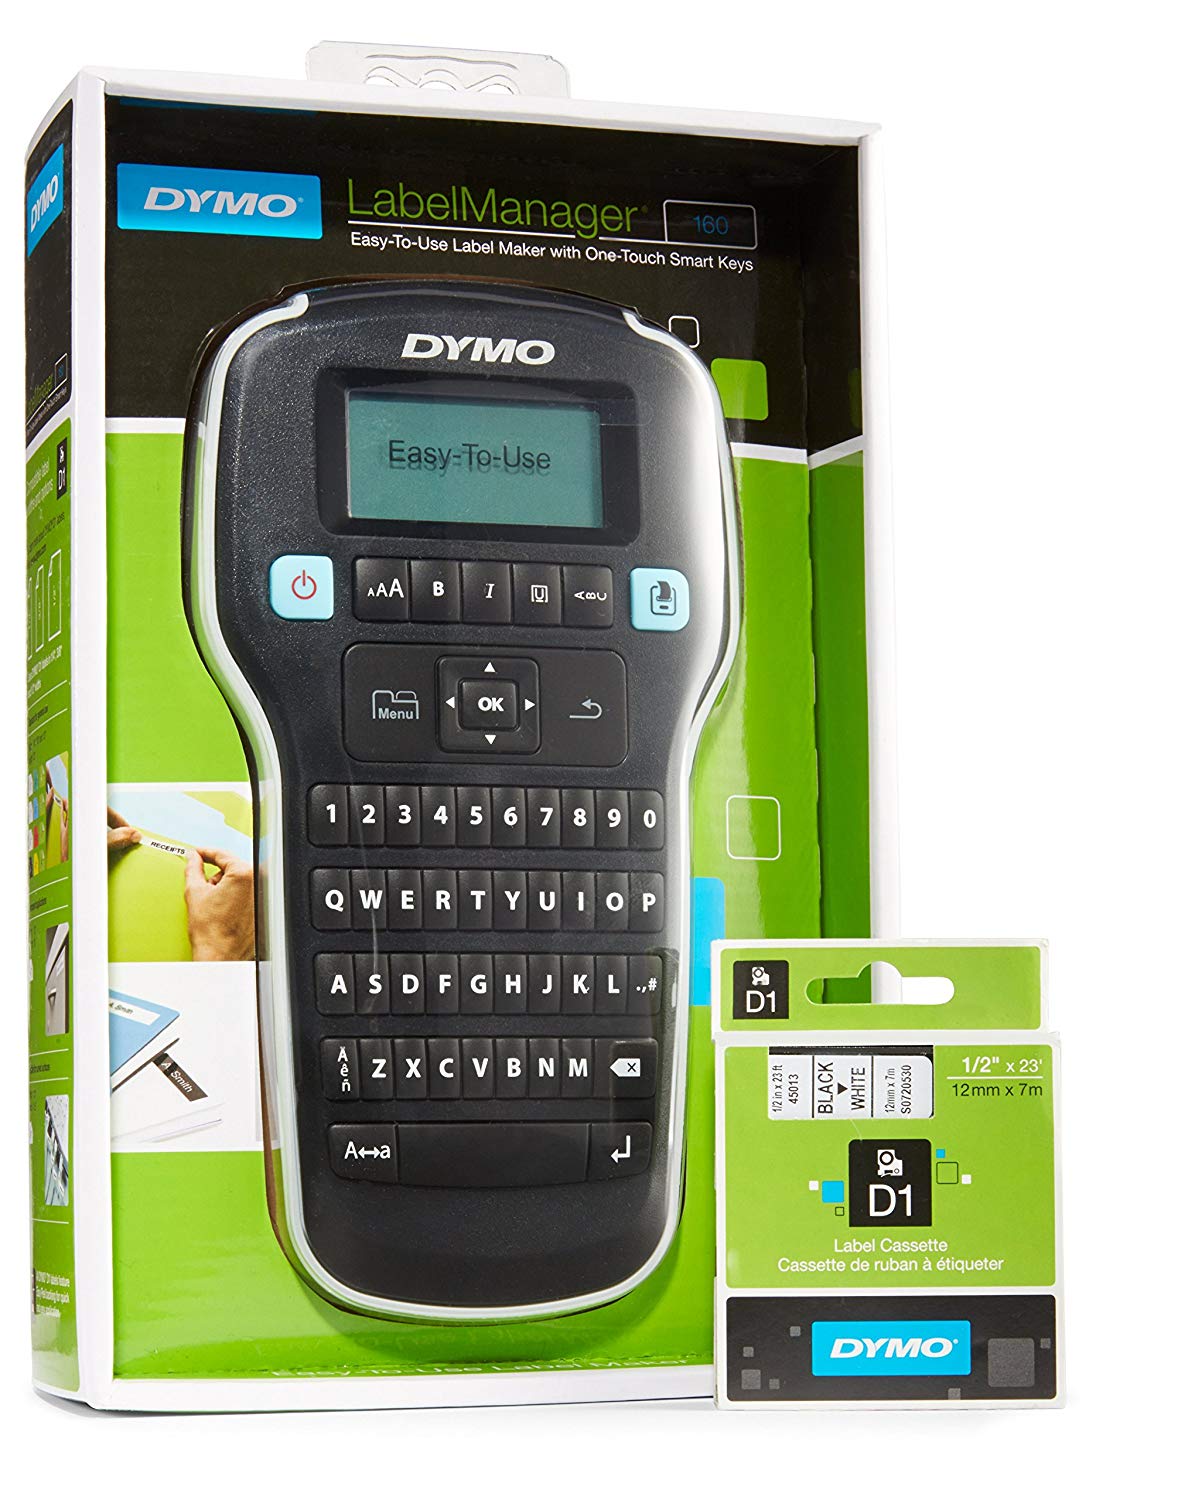 dymo clipart labelmanager 160